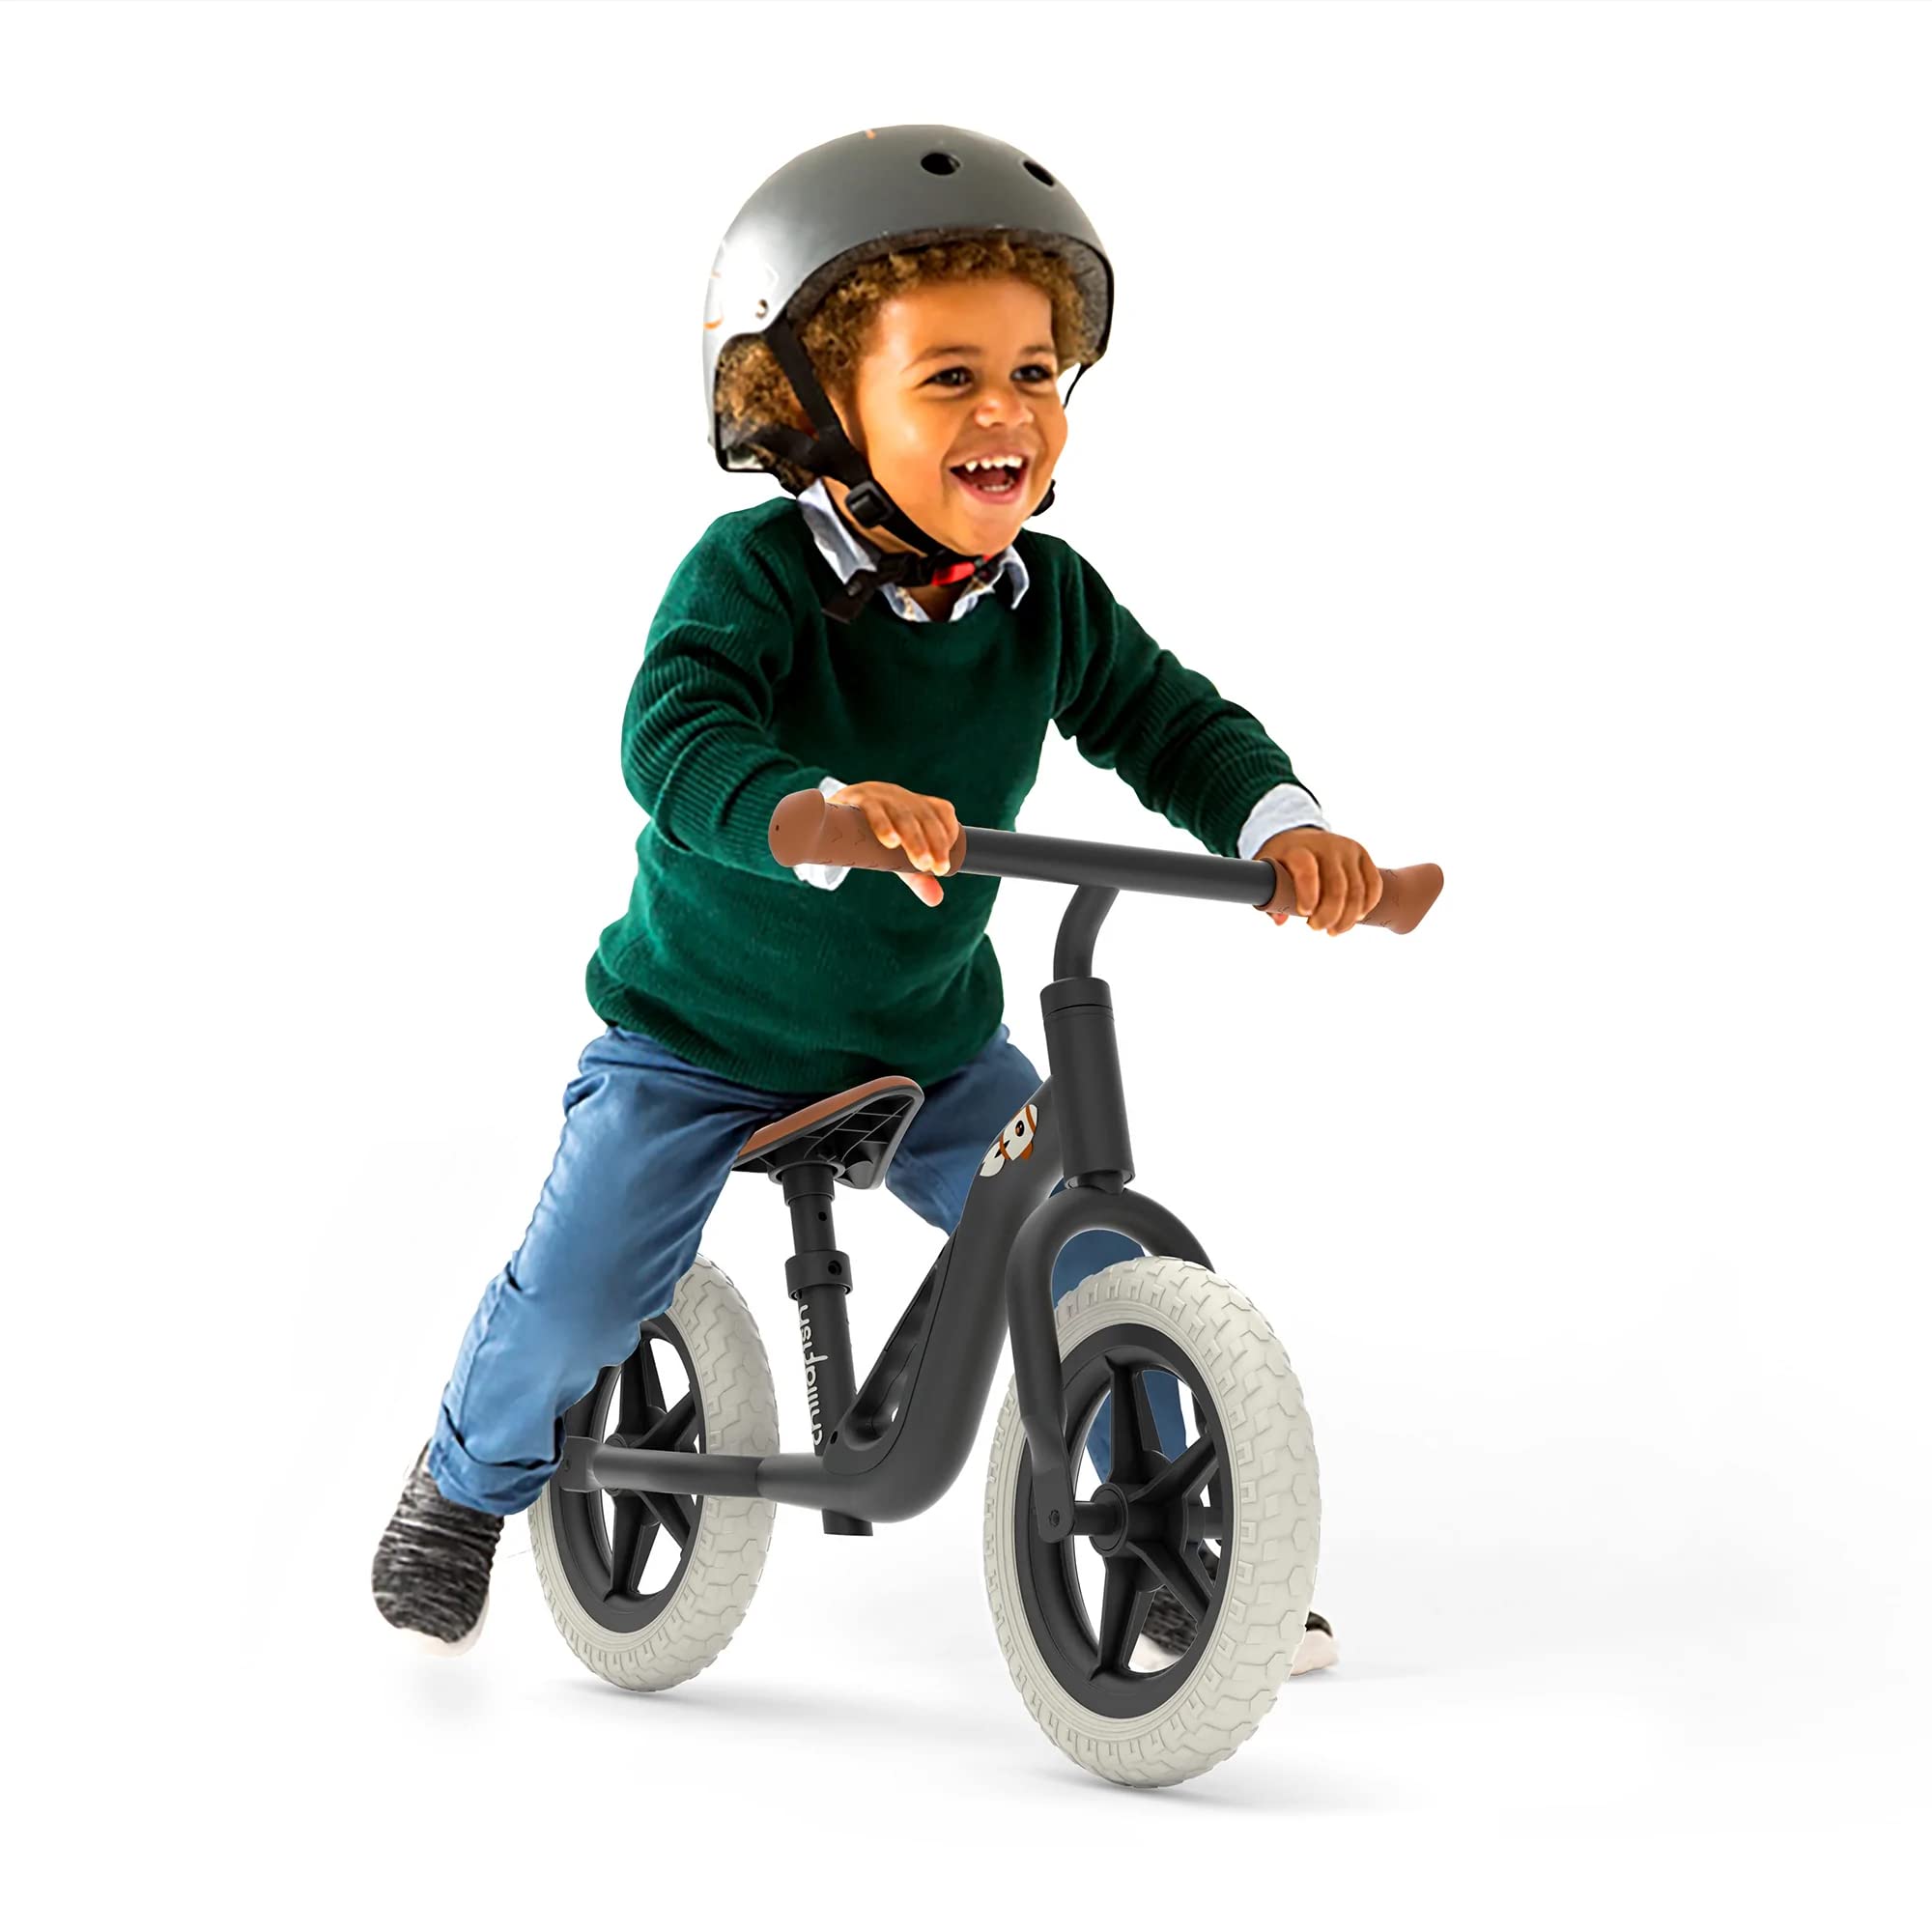 Chillafish Charlie Lightweight Toddler Balance Bike, Cute Trainer for 18-48 Months, Learn to Bike with 10